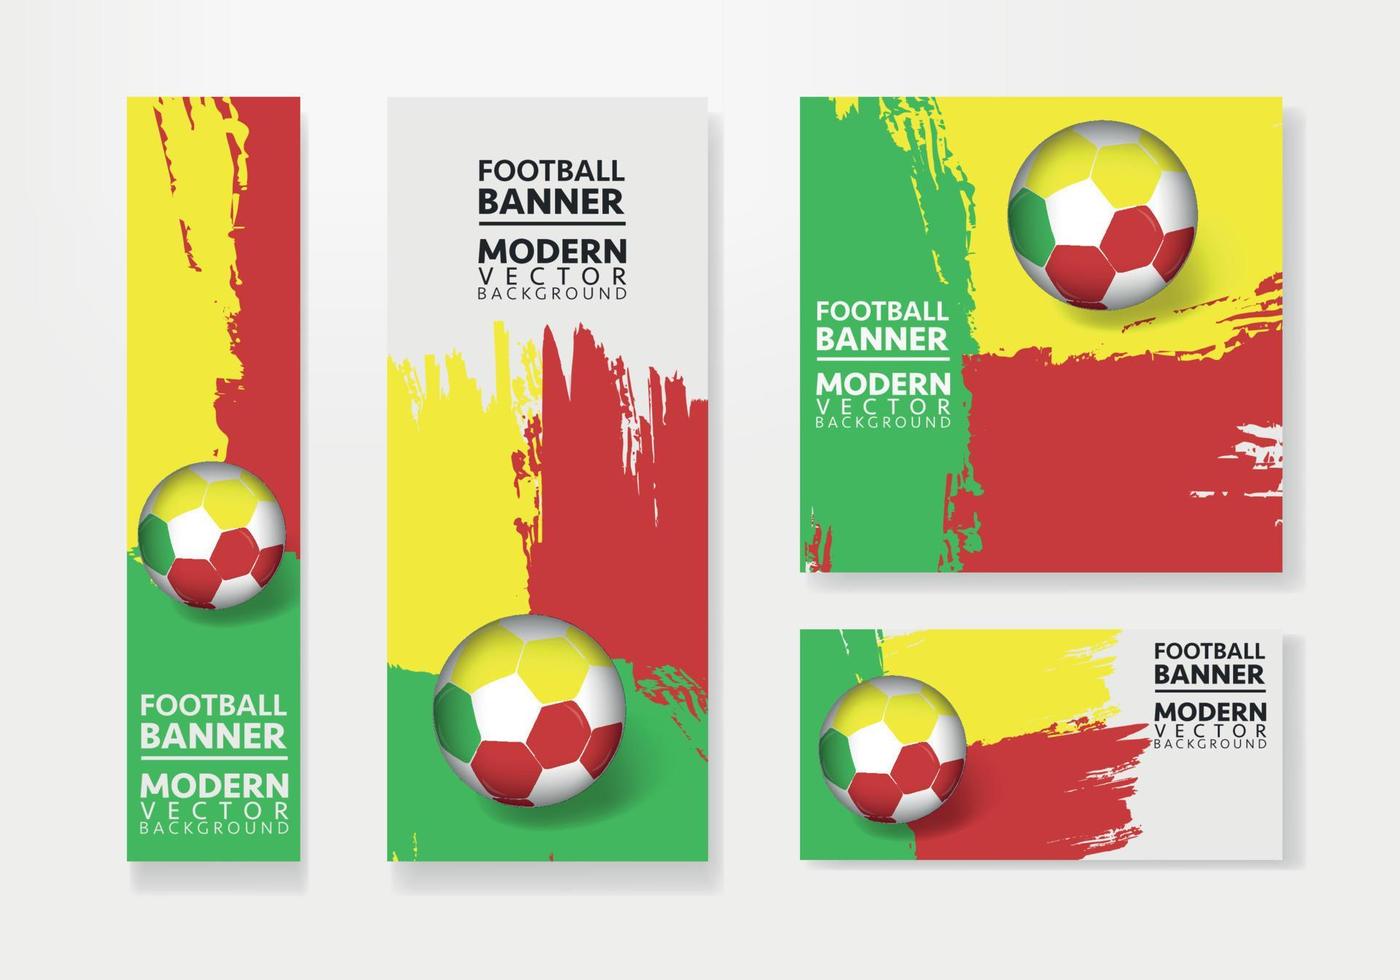 Benin football team with flag background vector design. Soccer championship concept with football ball illustration template. football banner design.